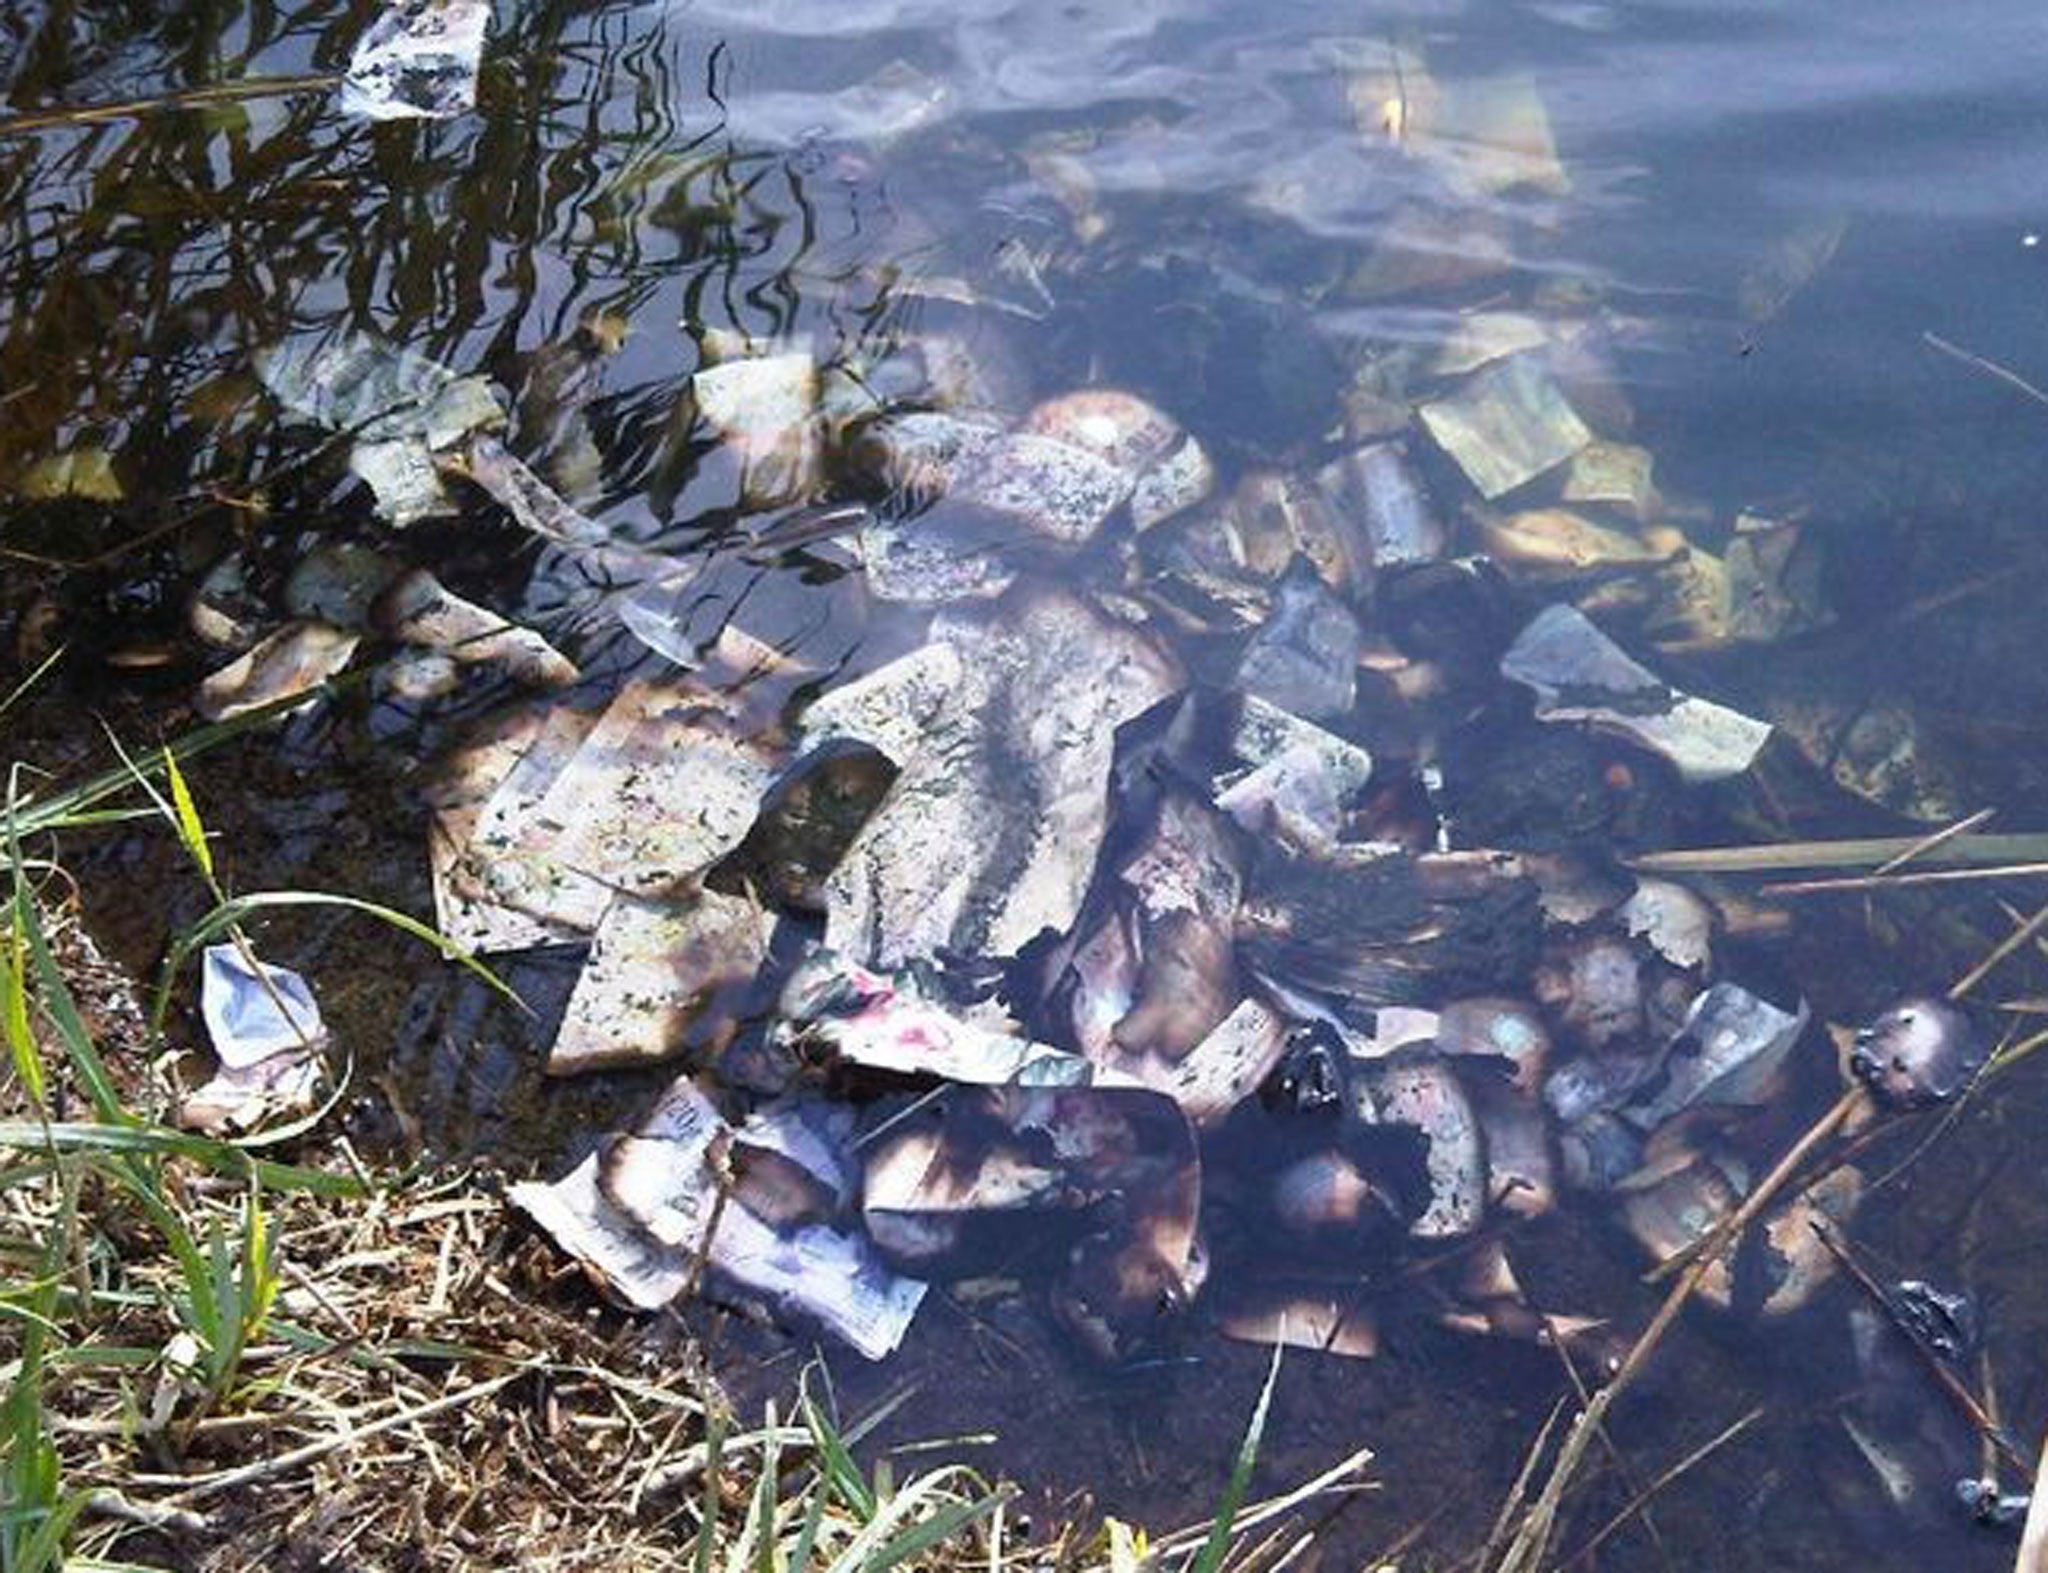 The notes were found in a river by a dog walker